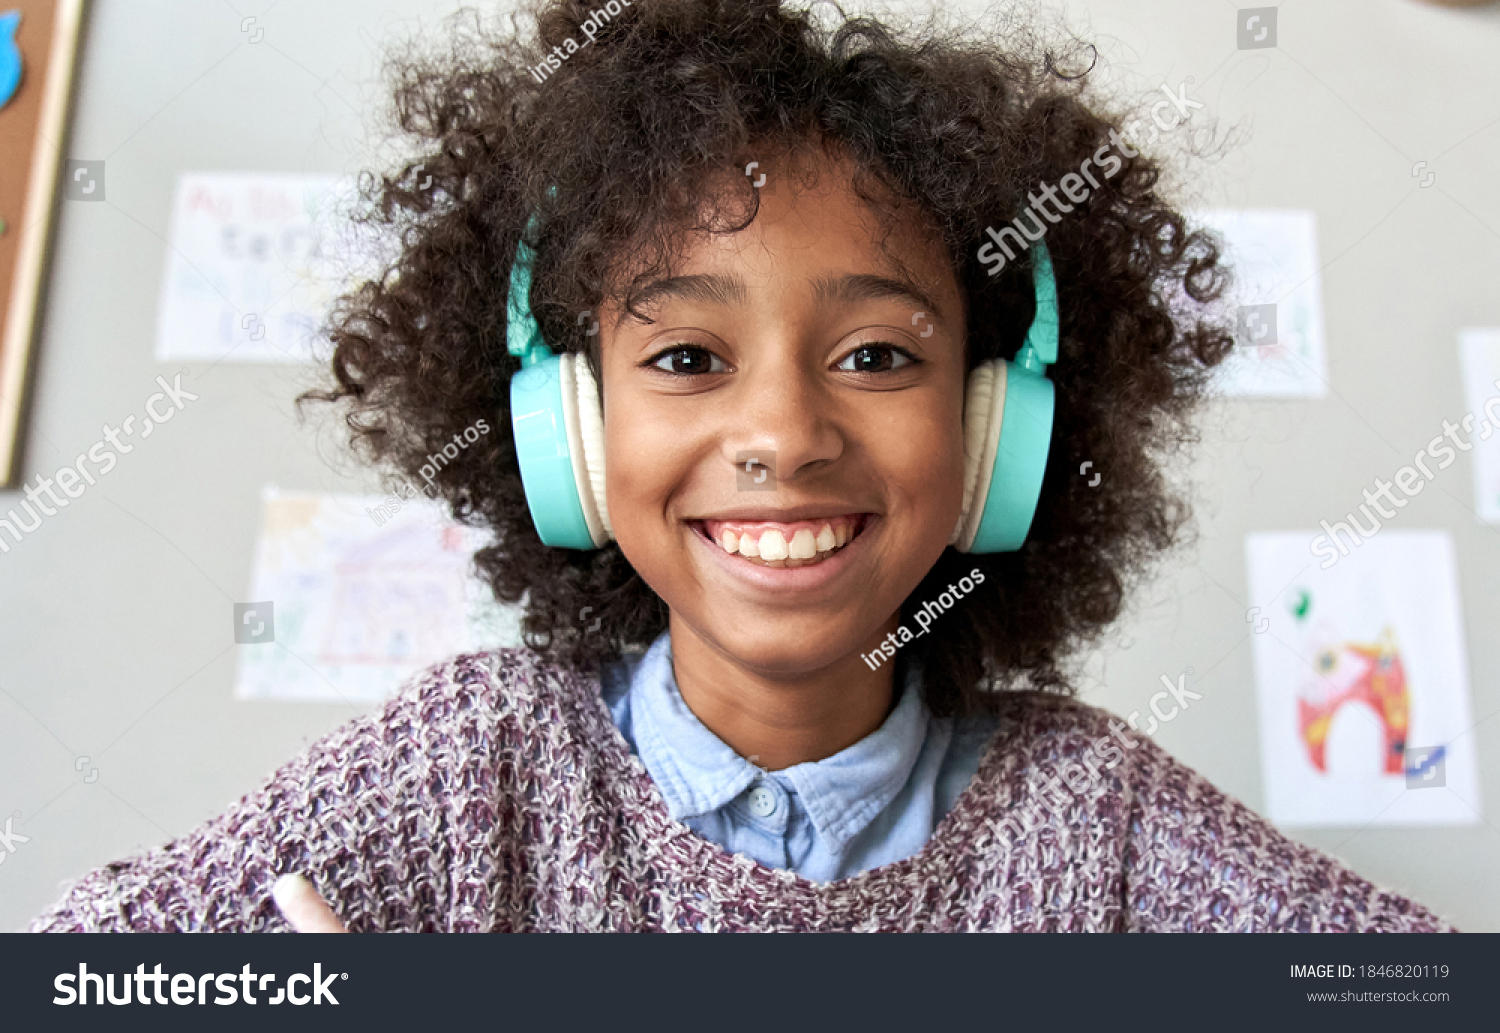 Happy african american mixed race kid child girl wearing headphones looking at camera or web cam remote distance learning on video zoom conference call, virtual class, headshot close up face portrait. #1846820119